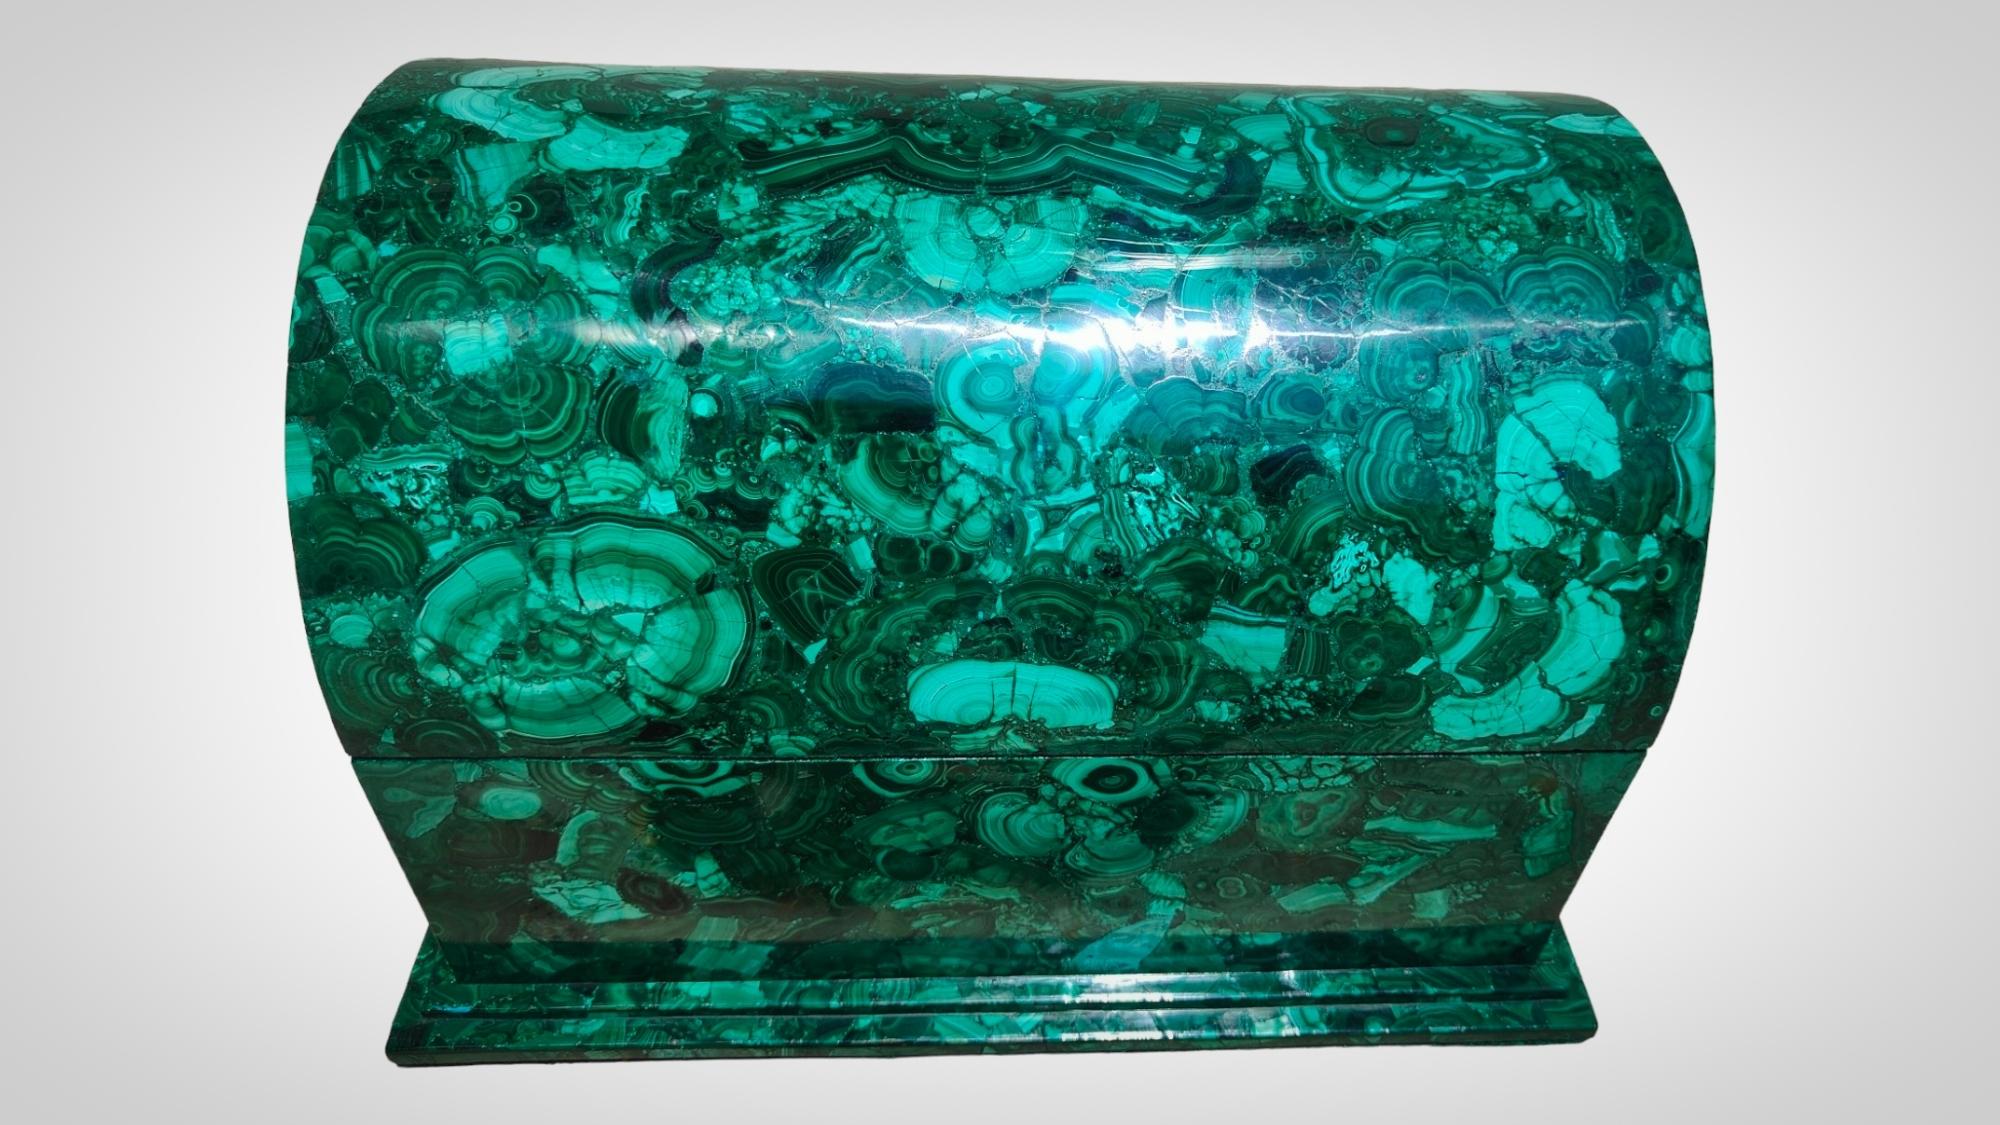 Large 20th Century Malachite Box
Large malachite box - semi-precious stone used by jewellers. It is in an excellent state of preservation. Twentieth century. Dimensions: 51x38x34cm